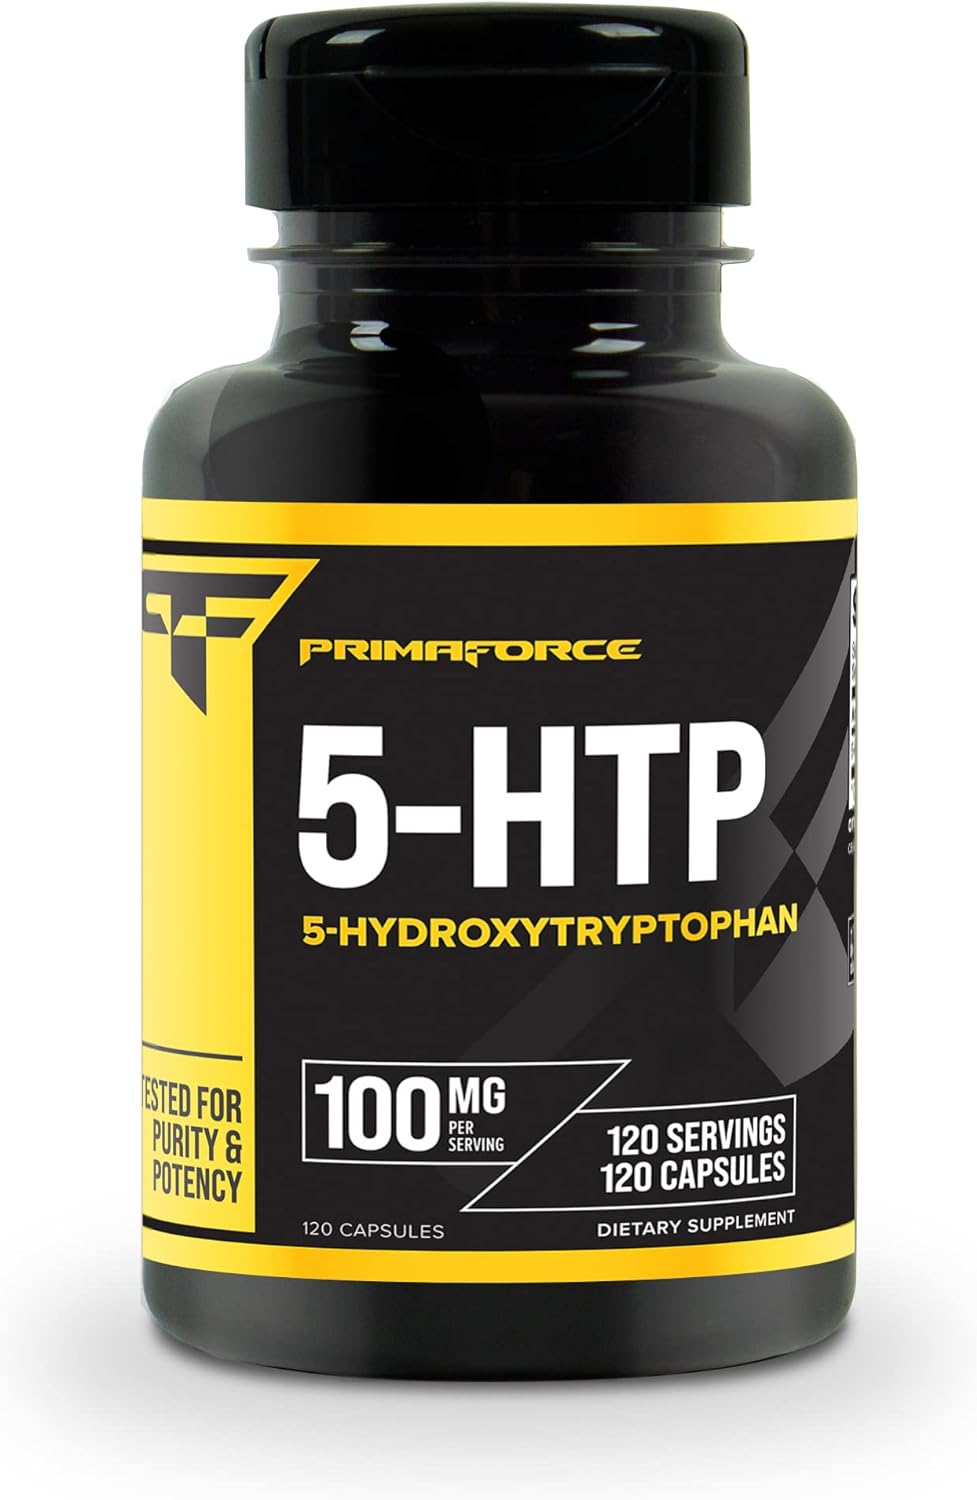 Primaforce 5-HTP 100mg Supplement, 120 Capsules, 100mg Per Serving, 5-3.21 Ounces